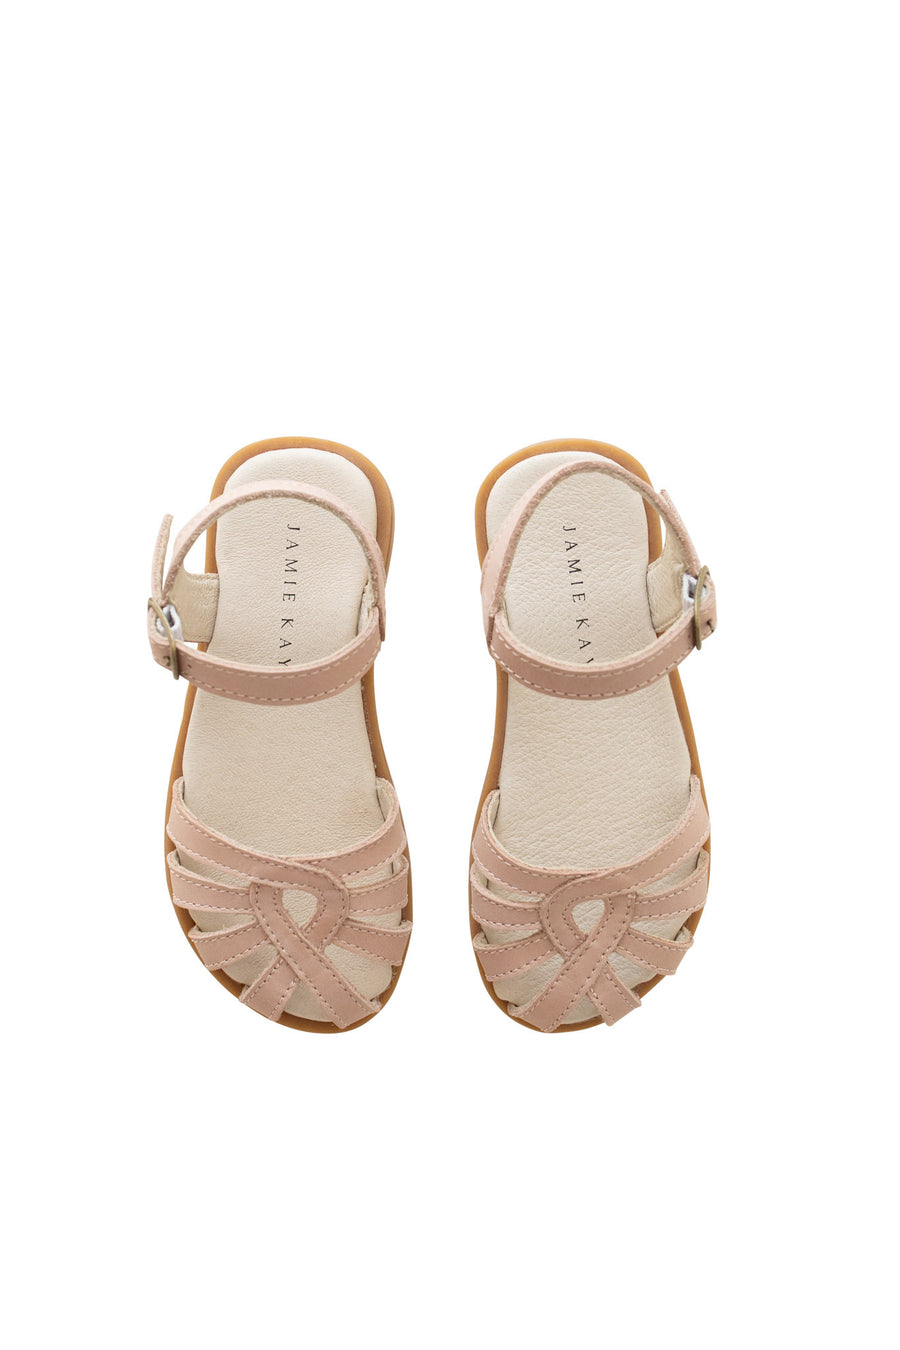 Leather Sandal - Blush Childrens Footwear from Jamie Kay NZ